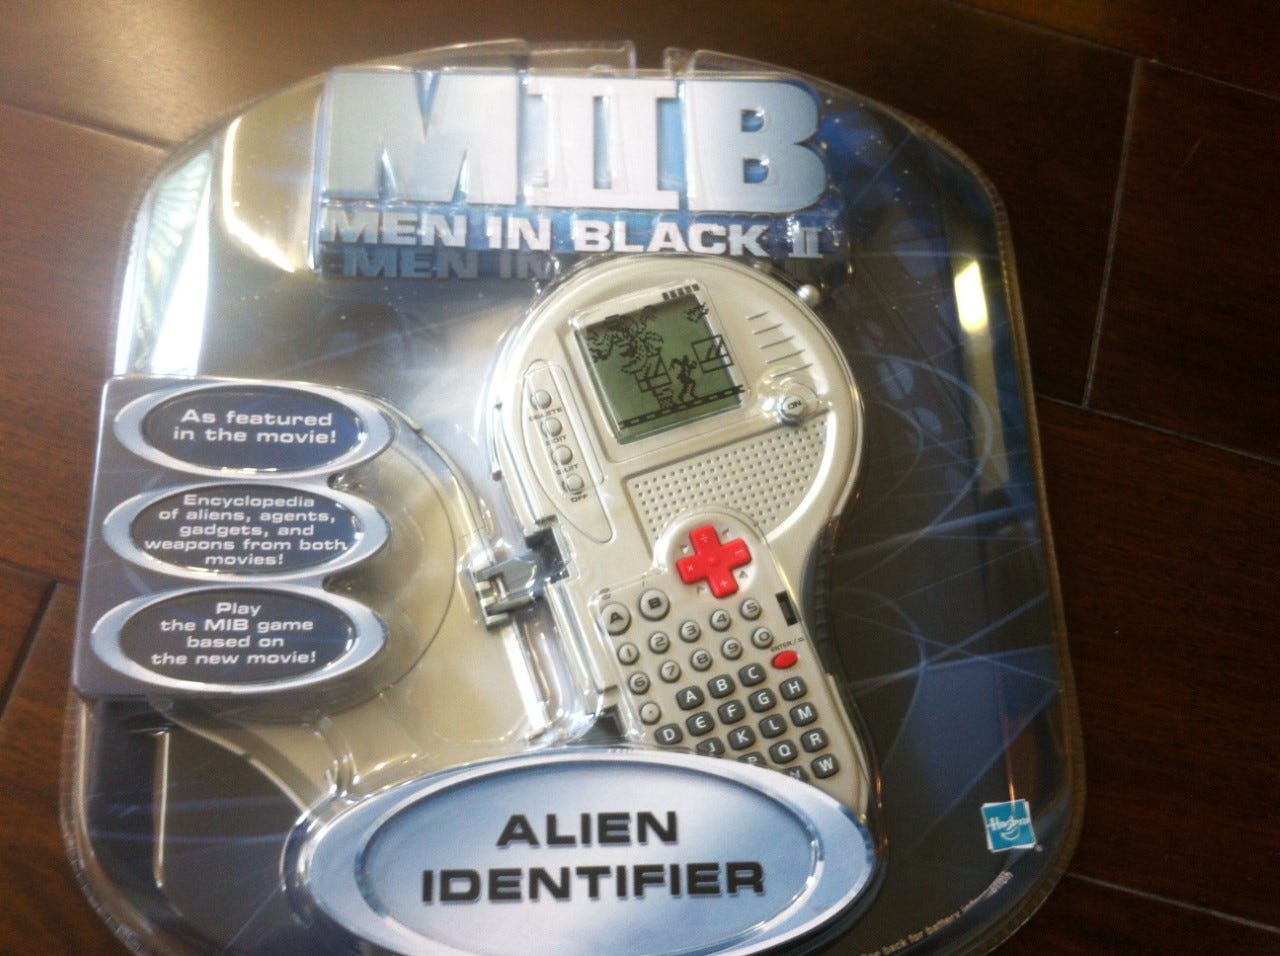 One of Chris's favourite toys: The Men in Black II Alien Identifier, a toy that was used in the movie itself!